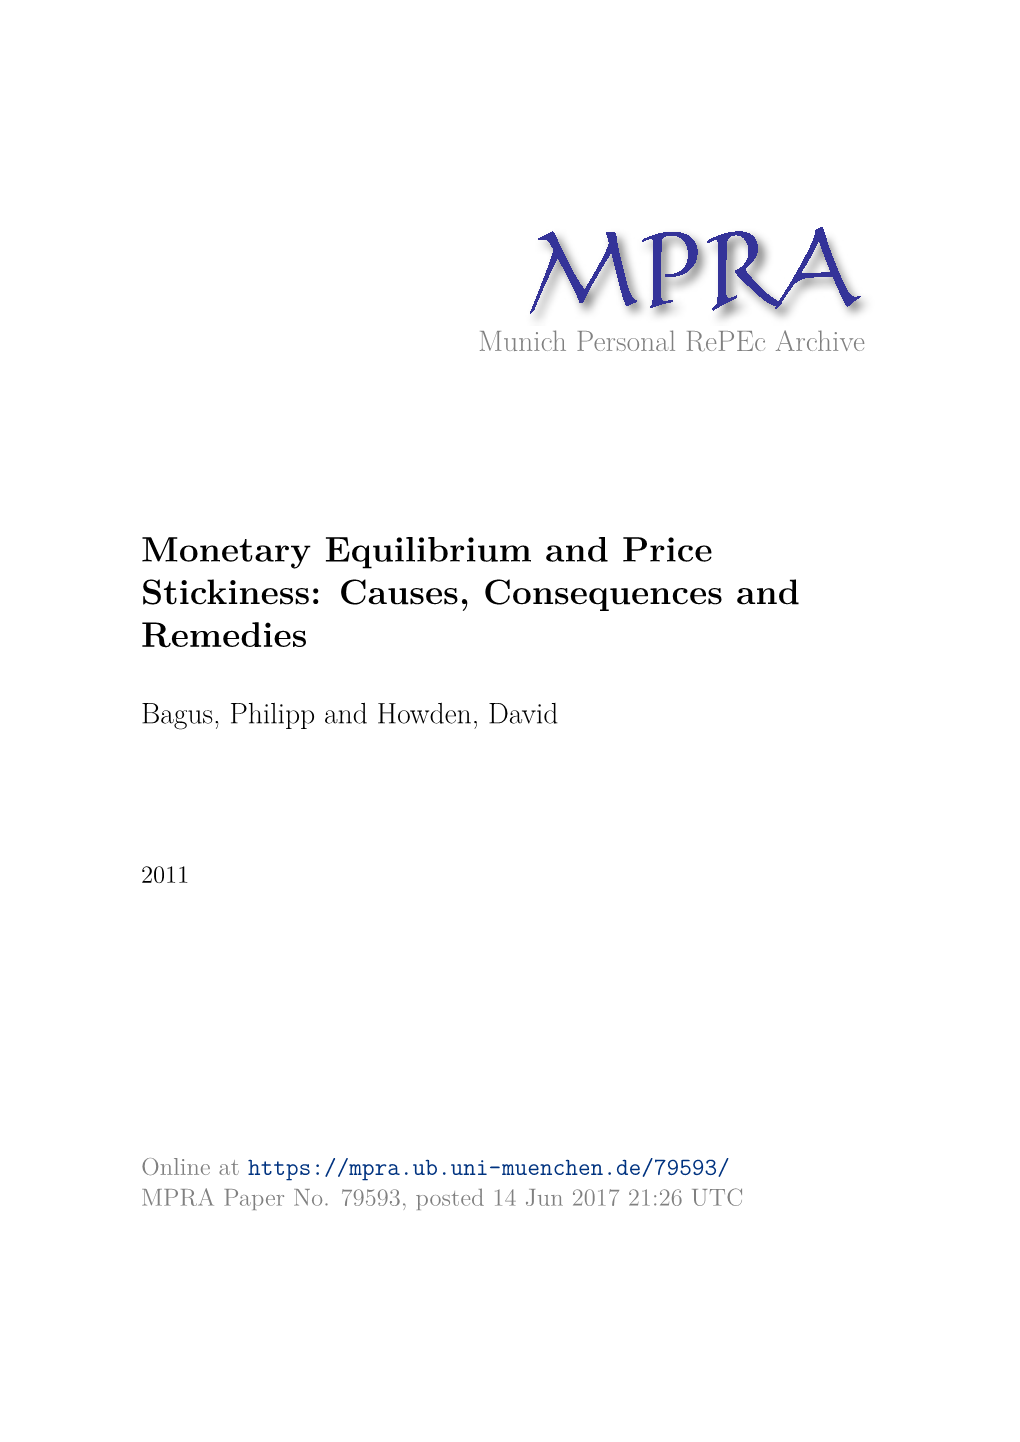 Monetary Equilibrium and Price Stickiness: Causes, Consequences and Remedies